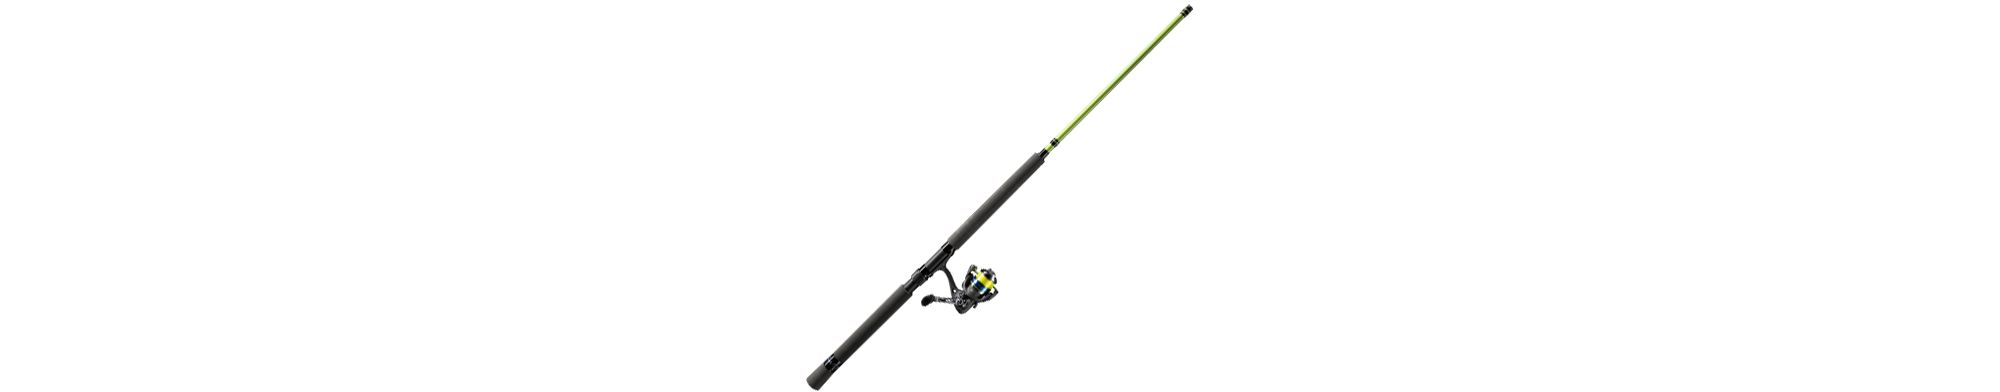 Lew's Crappie Thunder Jig/Troll Reel and Fishing Rod Combo, 12